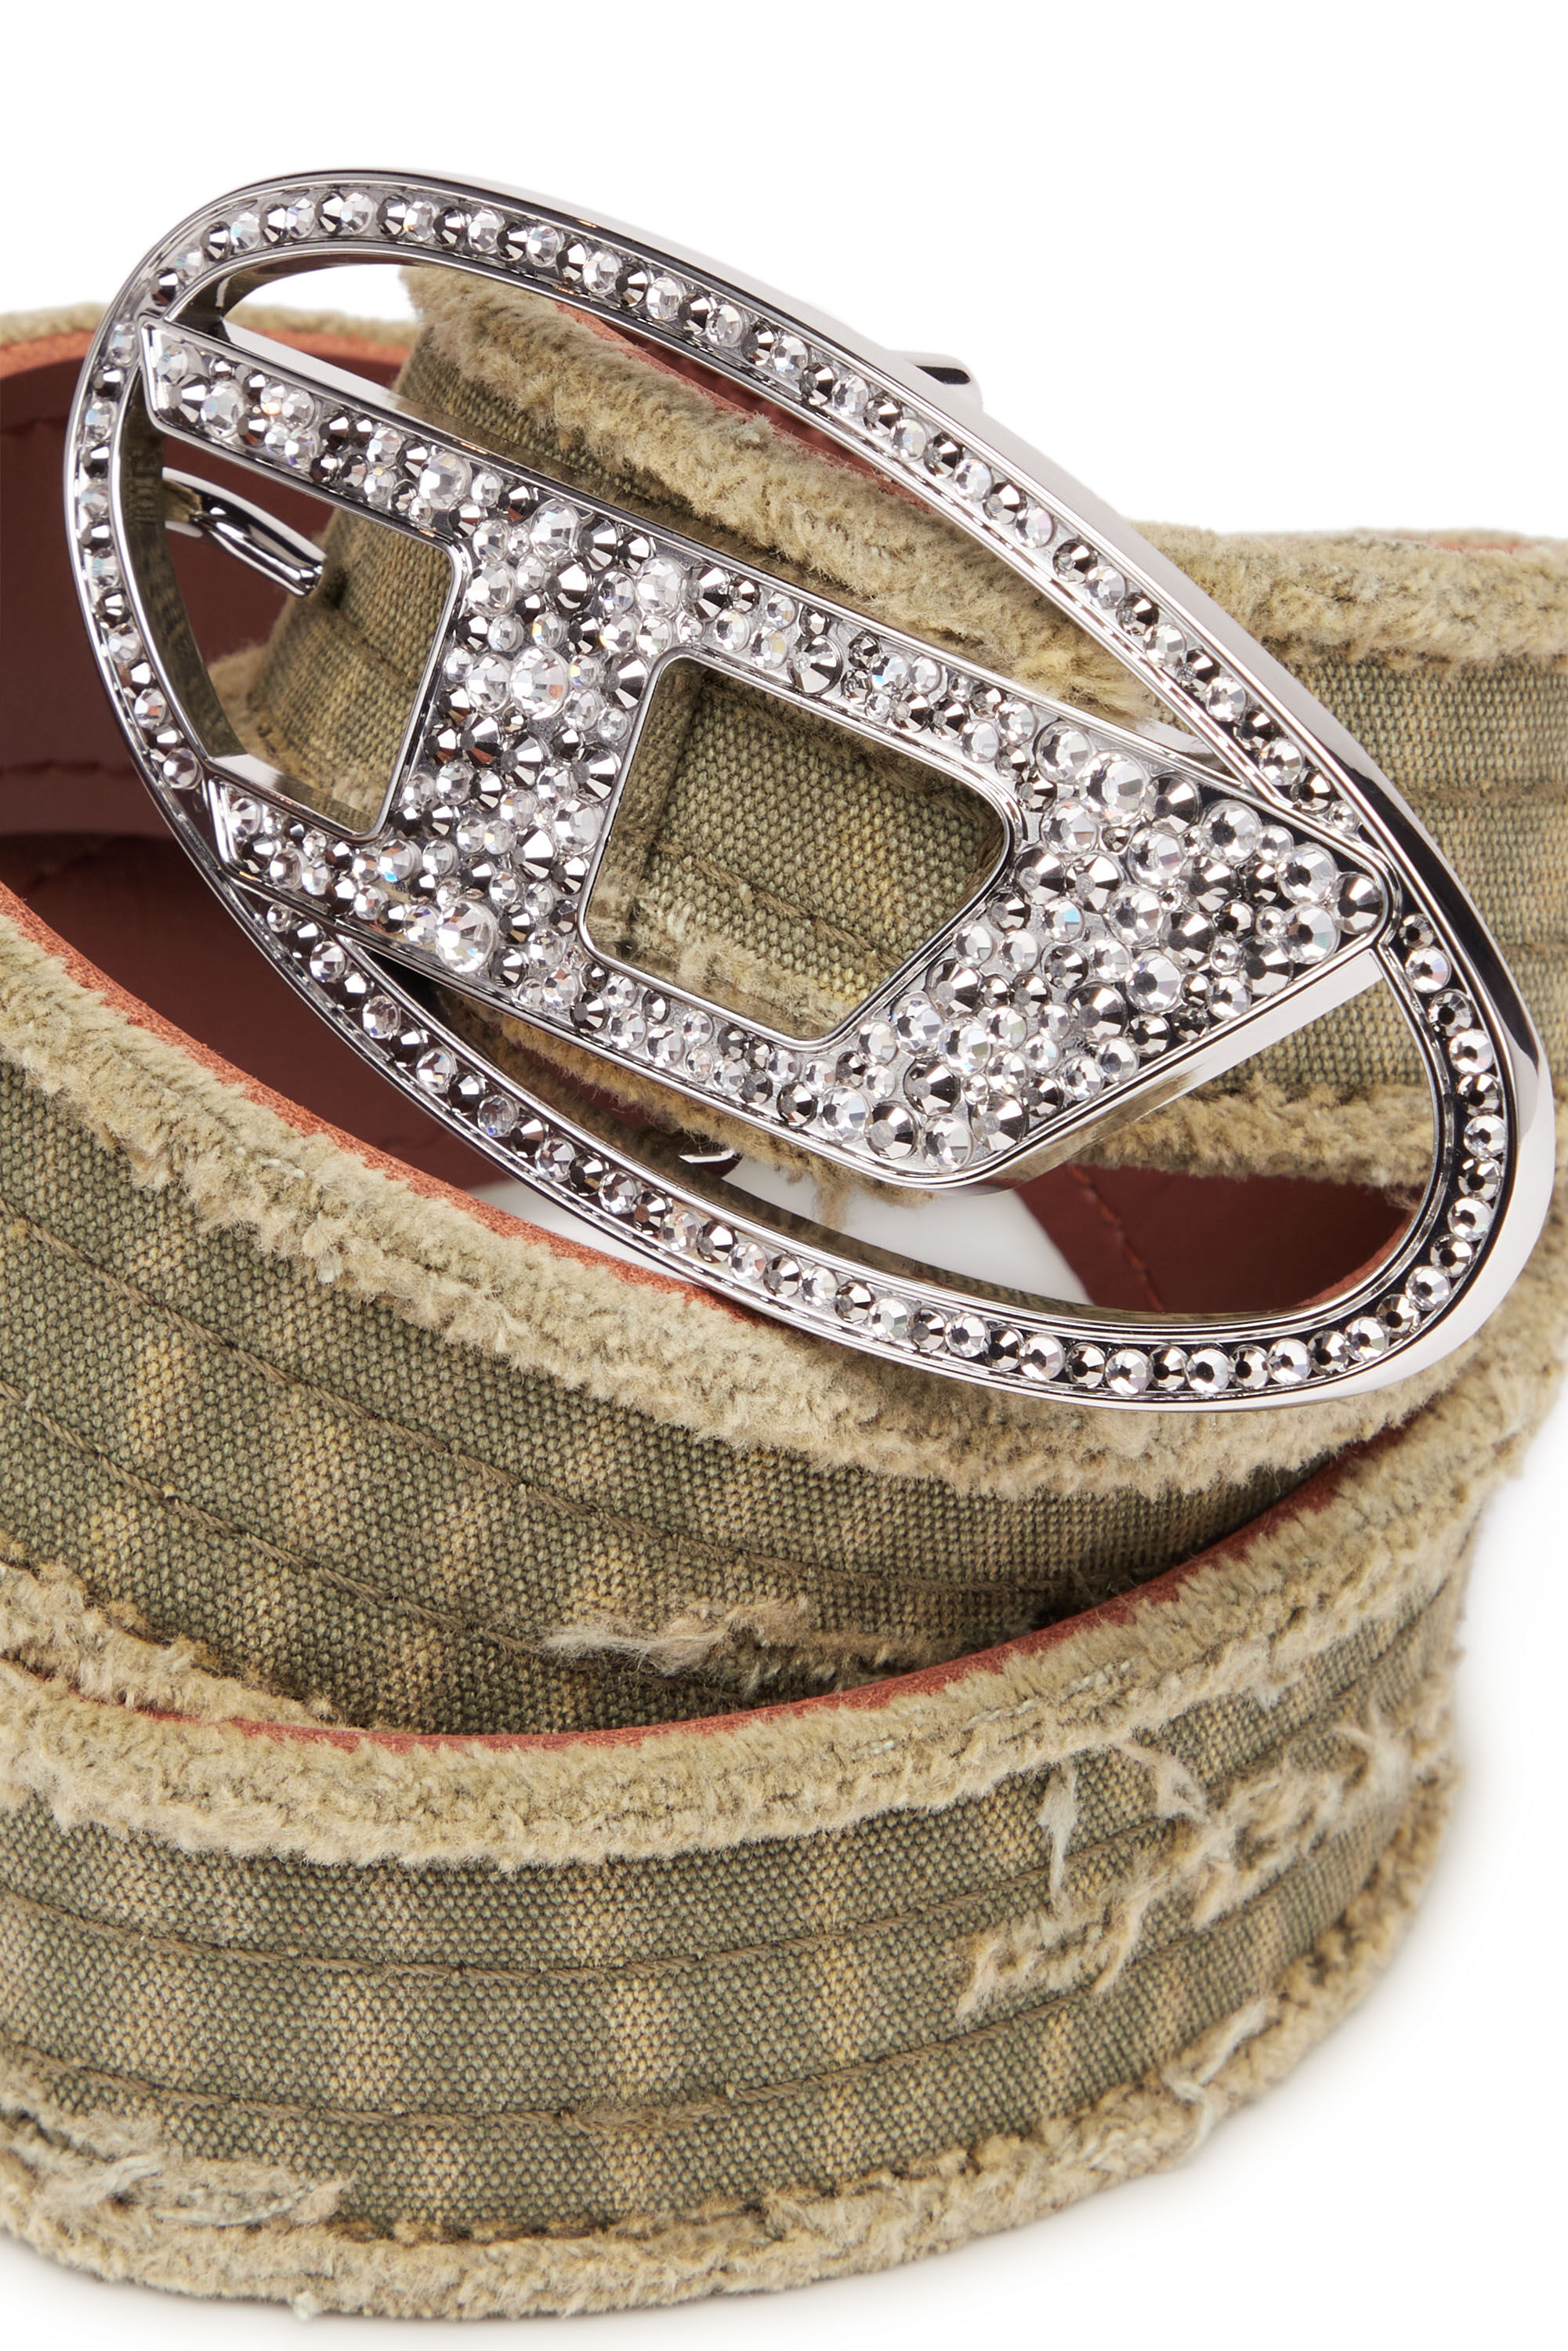 B-1DR STRASS Canvas and leather belt with crystals｜グリーン｜ウィメンズ｜DIESEL